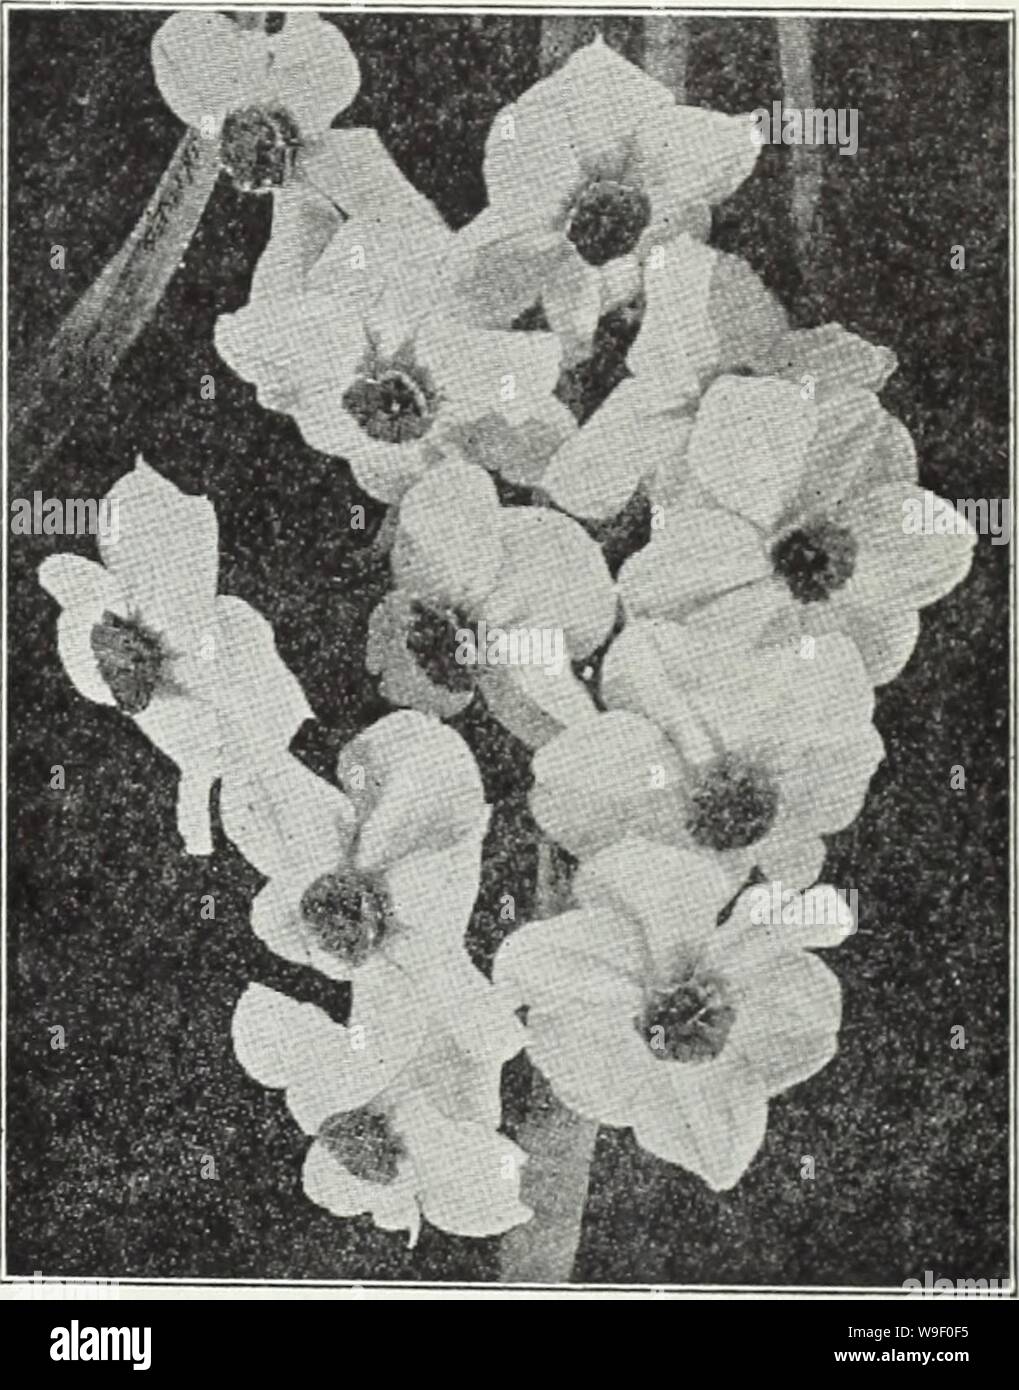 Archive image from page 6 of Currie's bulbs and plants . Currie's bulbs and plants : autumn 1928  curriesbulbsplan19curr Year: 1928 ( Narcissus Poetaz Elvira Narcissus Poetaz By crossing- Poeticus and Polyantlius varieties this new perfectly hardy strain of Narcissus was ob- tained. Besides being hardy, this class does not have the strong-, rather disag-reeable scent of the Poly- anthus varieties. The flowers are larg:e, three to four on a stem, each bulb bearing- two or three stems. long I31vira — White with yellow cup Laurens Ivoster — Flowers larg-e, pure white with deep orange- yellow cup, Stock Photo